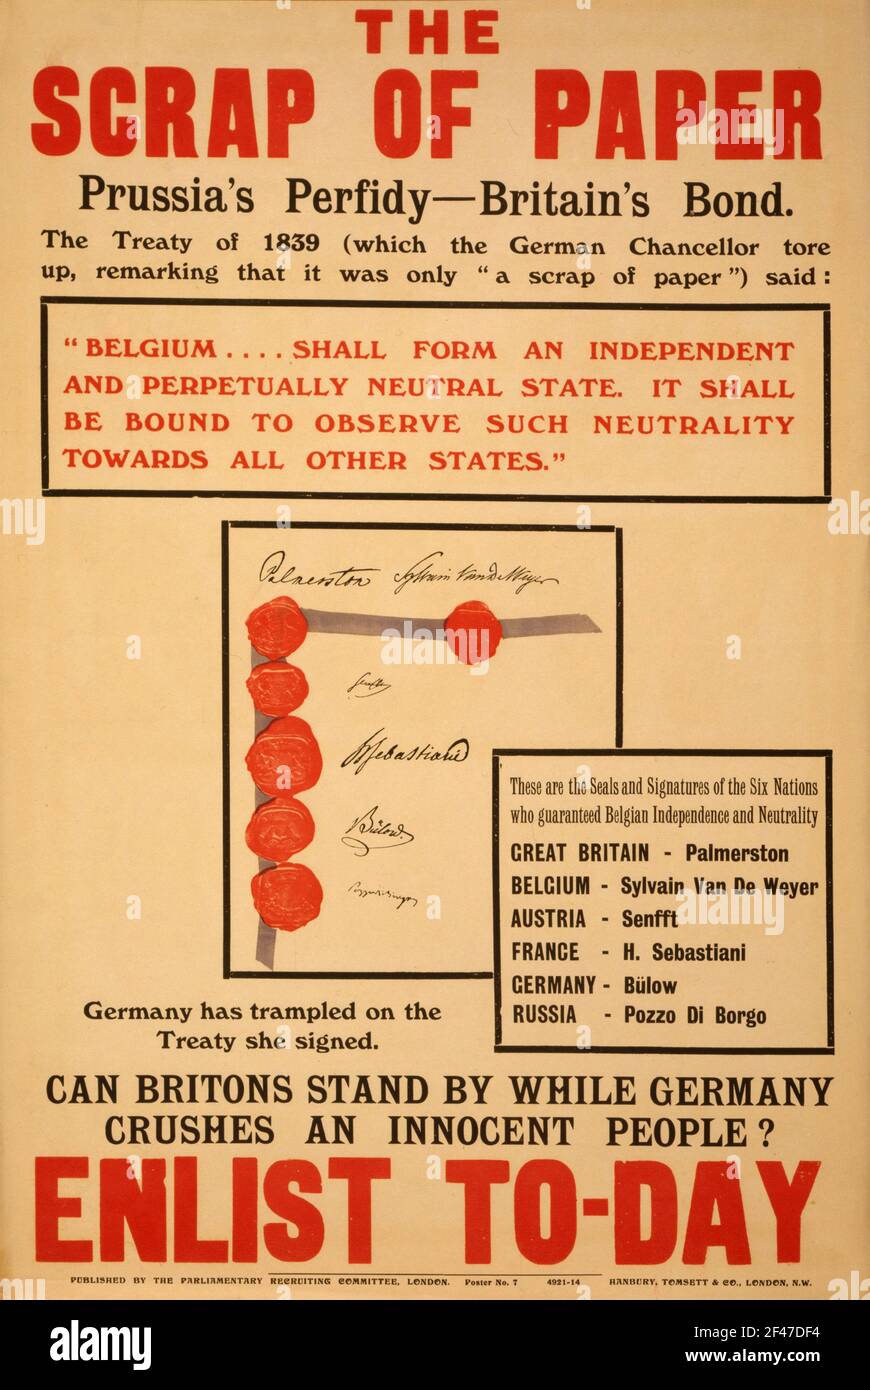 A first world war recruitment poster showing the signatures of the Treaty of 1839 saying The Scrap of Paper Stock Photo